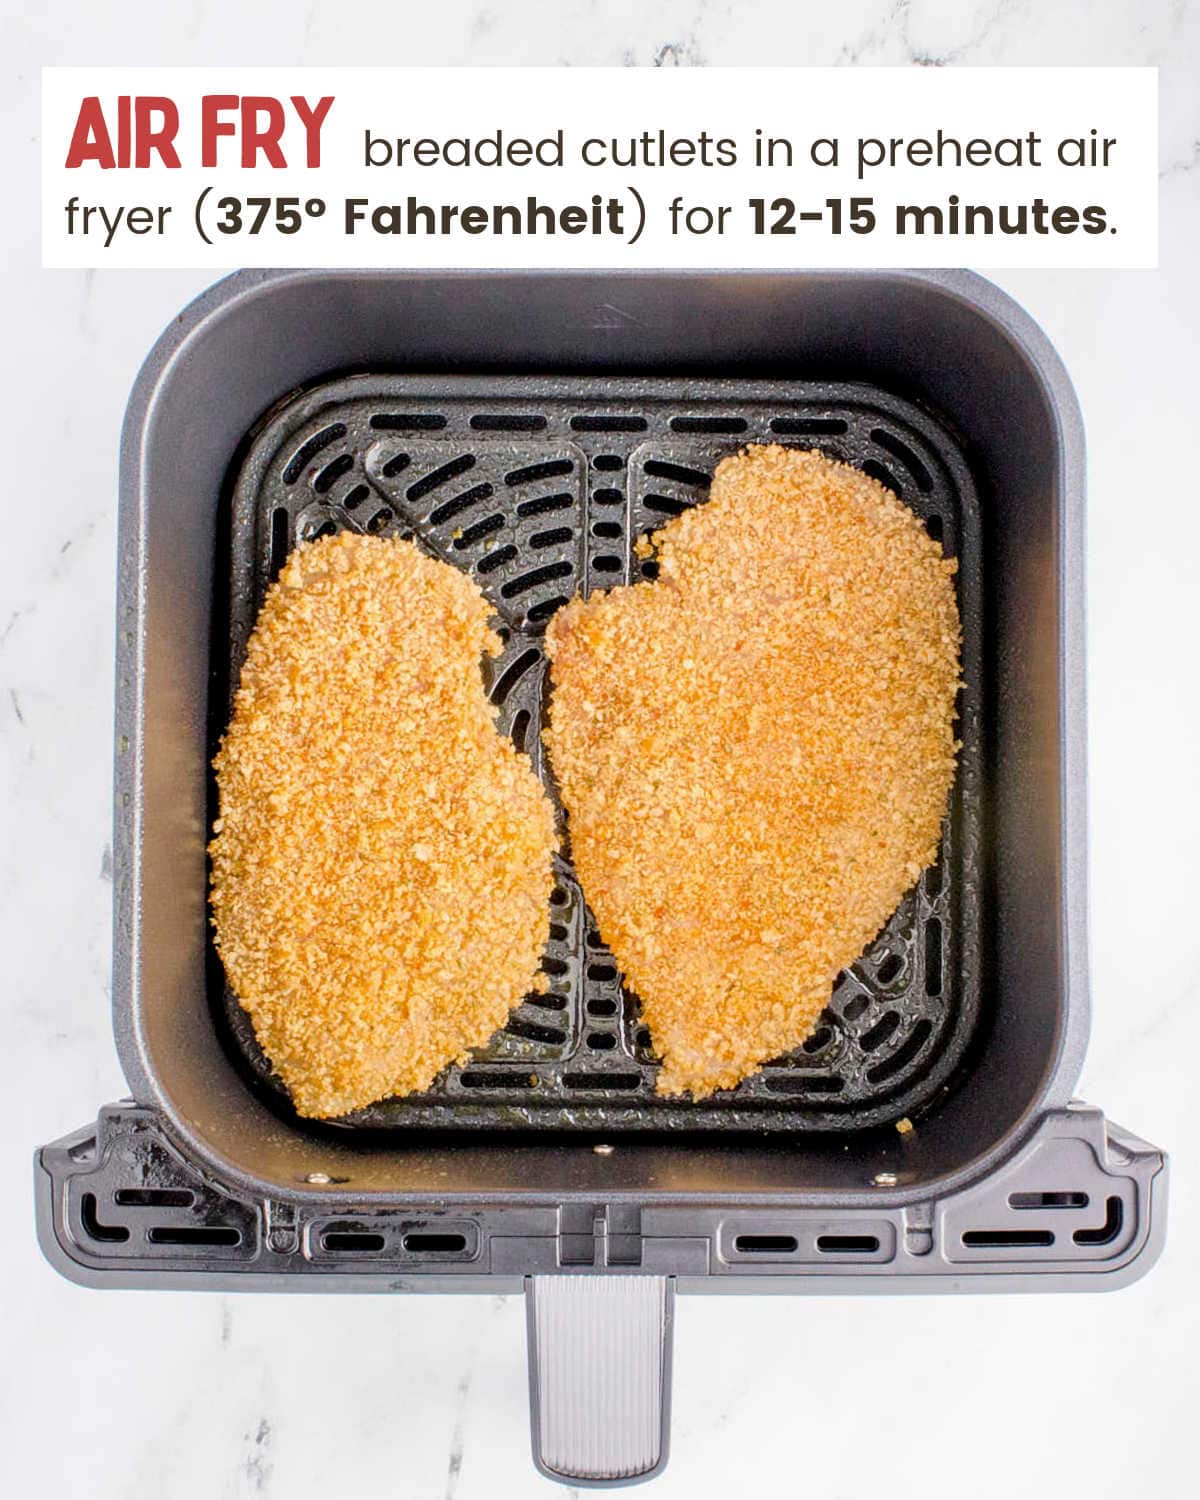 Two chicken cutlets cooked in an air fryer.